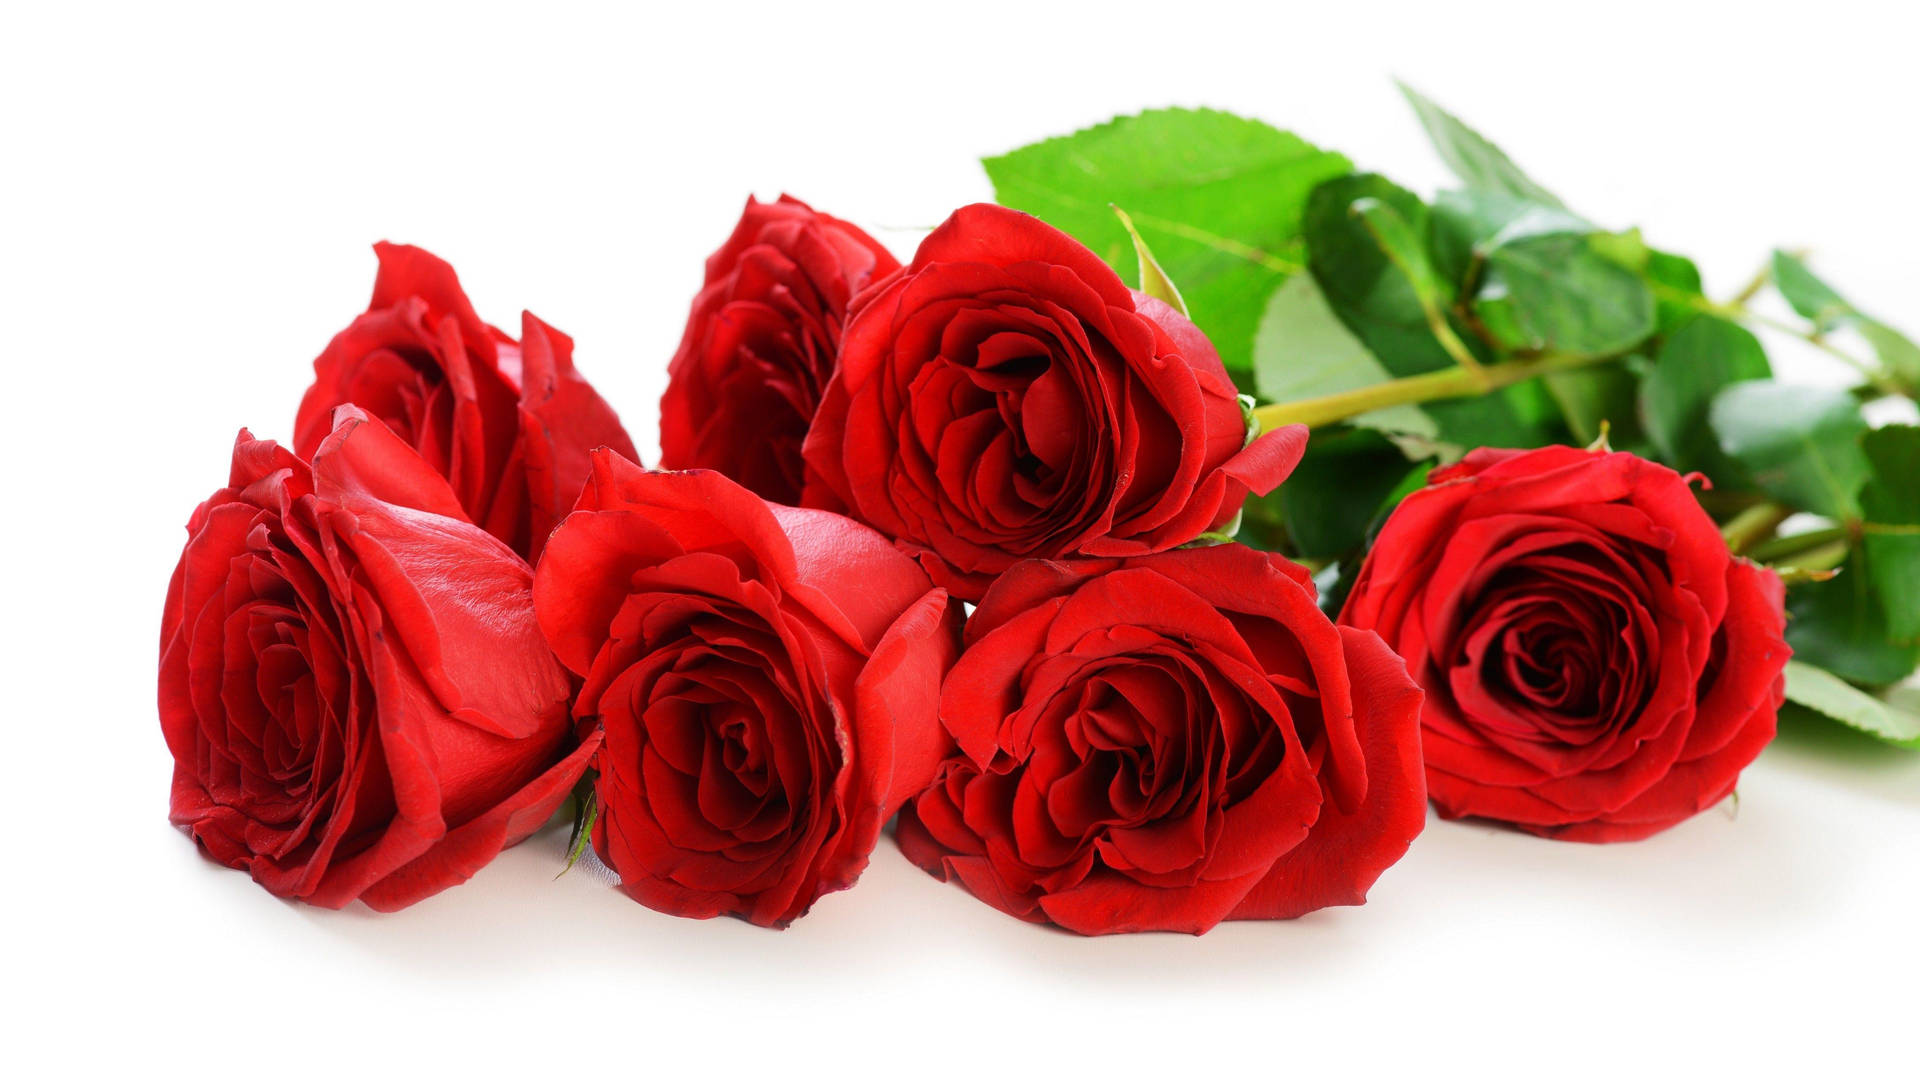 Free Love Rose Background Photos, [100+] Love Rose Background for FREE |  